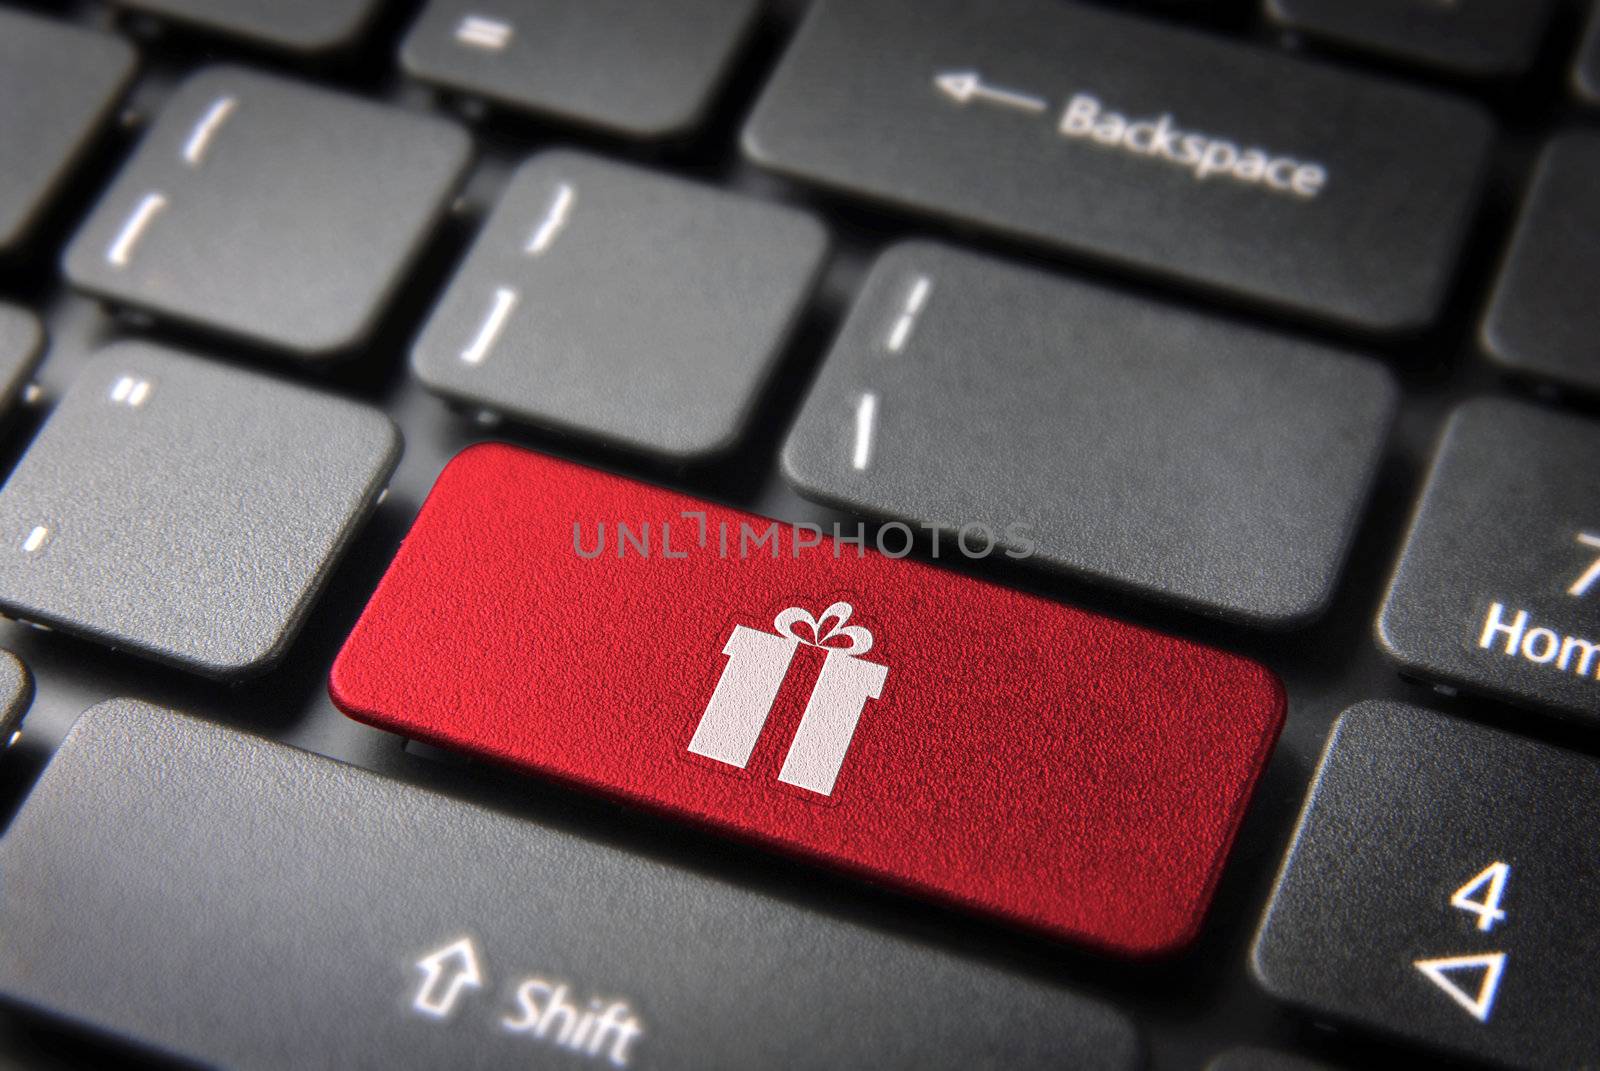 Red Christmas key with gift box icon on laptop keyboard. Included clipping path, so you can easily edit it.